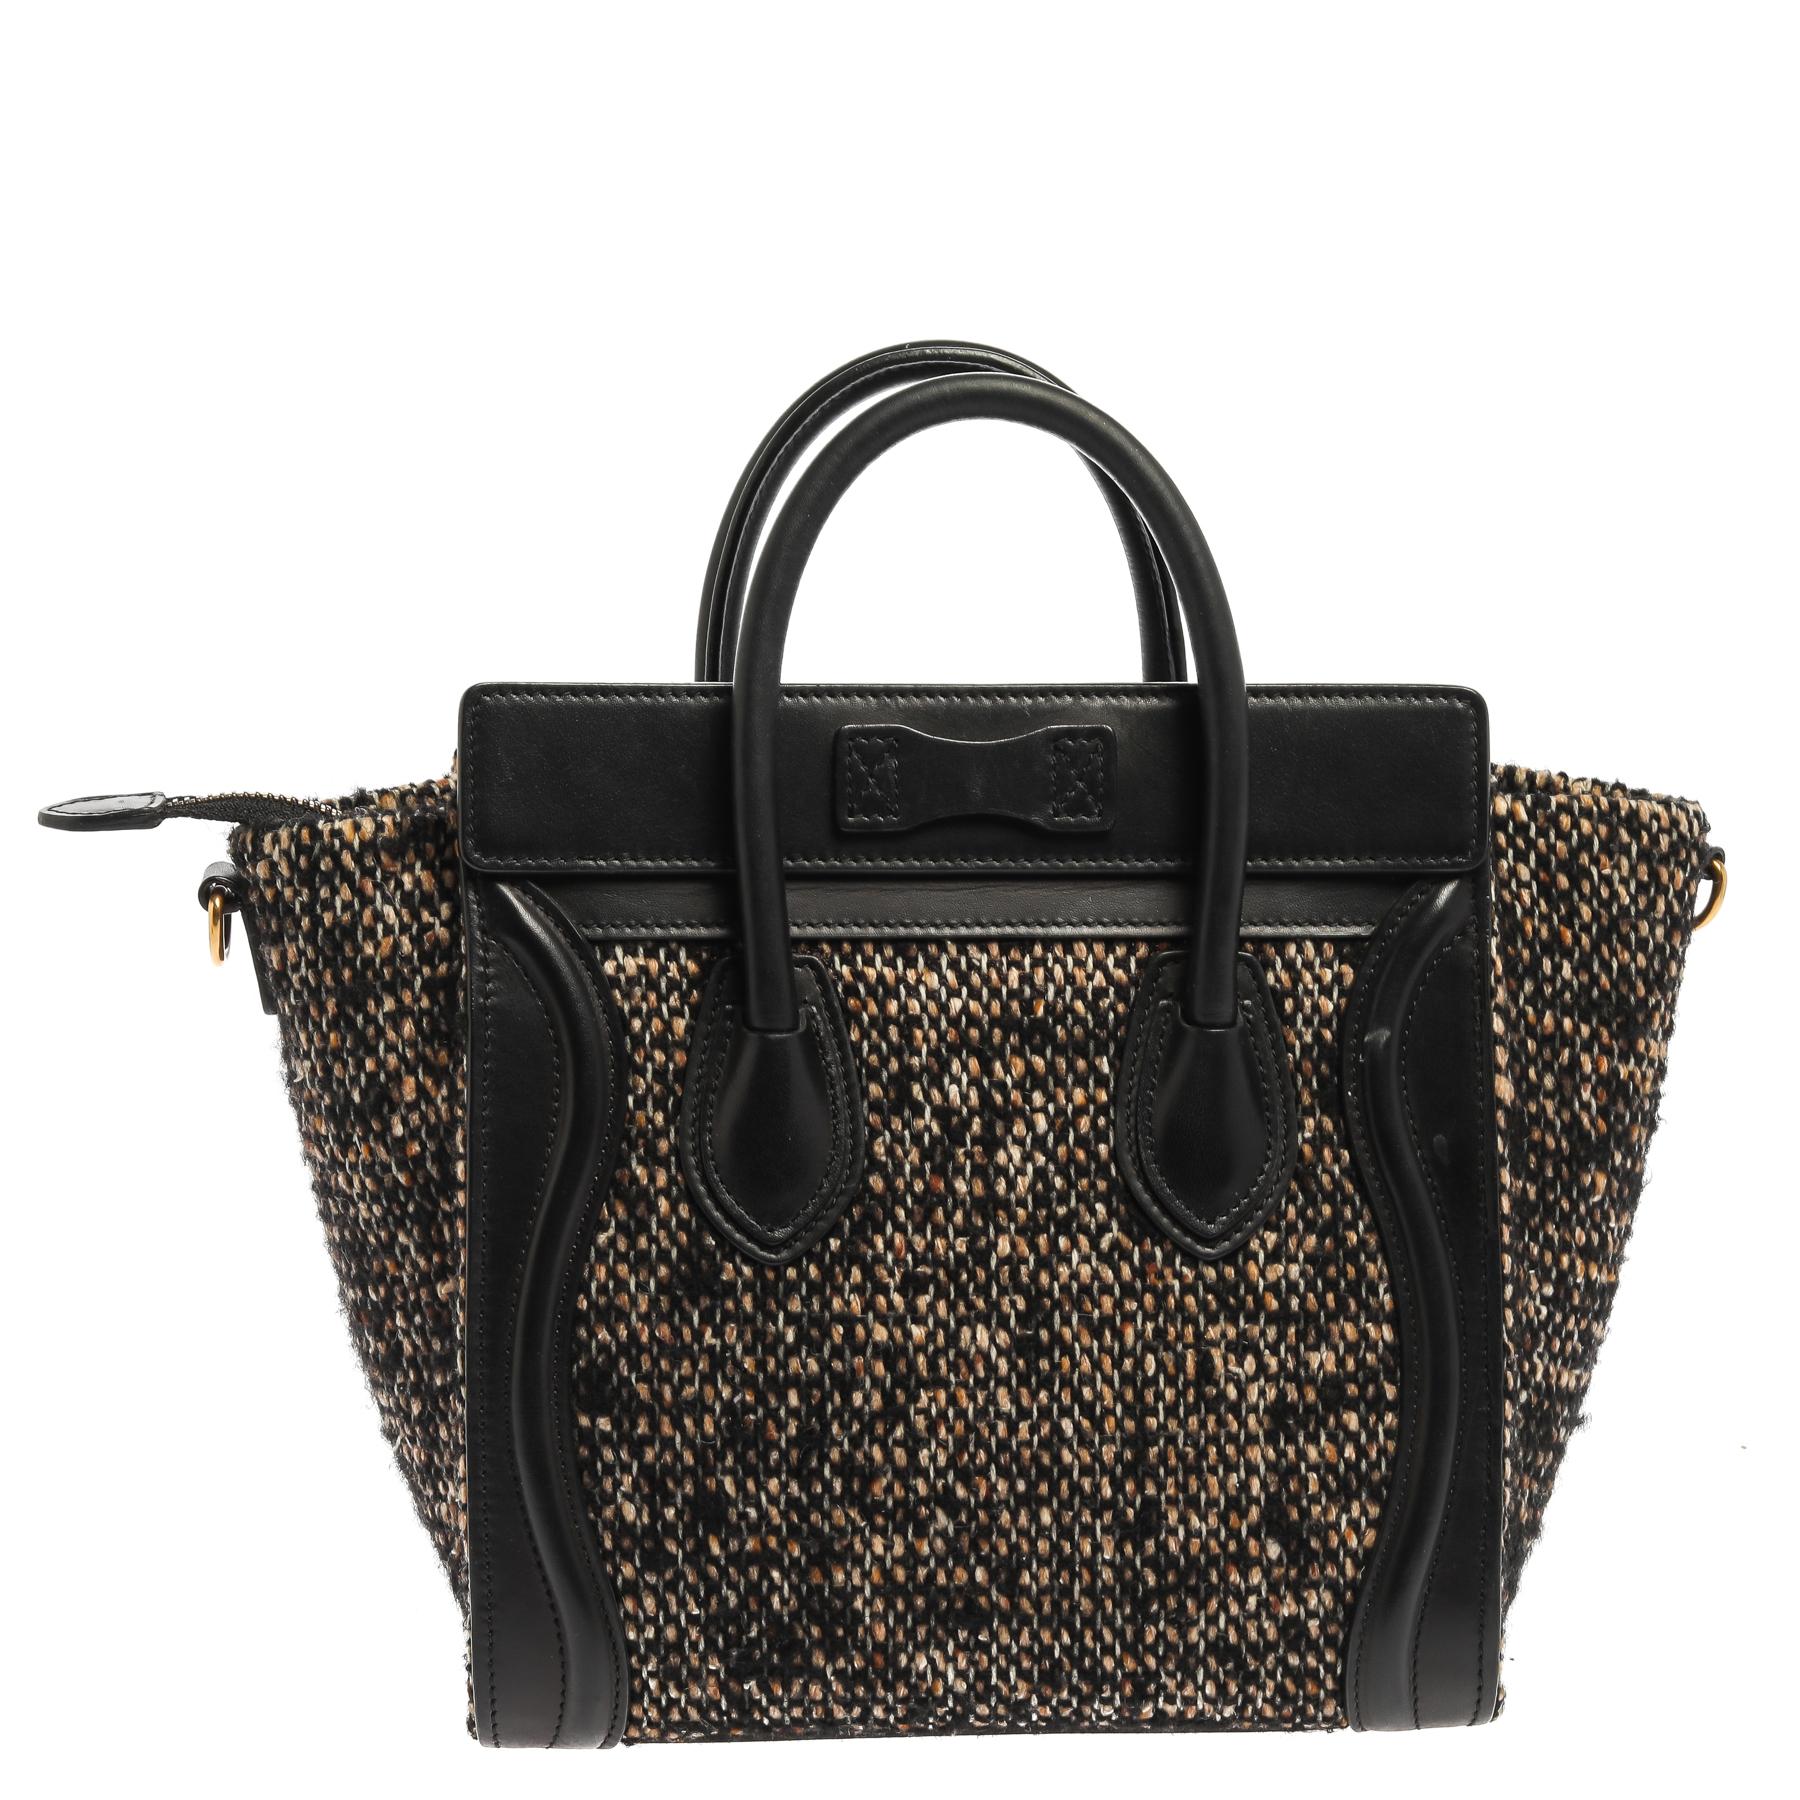 This Celine Luggage tote is stylish and perfect for everyday use. Crafted from tweed and leather, it features the signature flappy wings, double rolled handles, and a front zip pocket. The top zip closure opens to a perfectly sized interior that